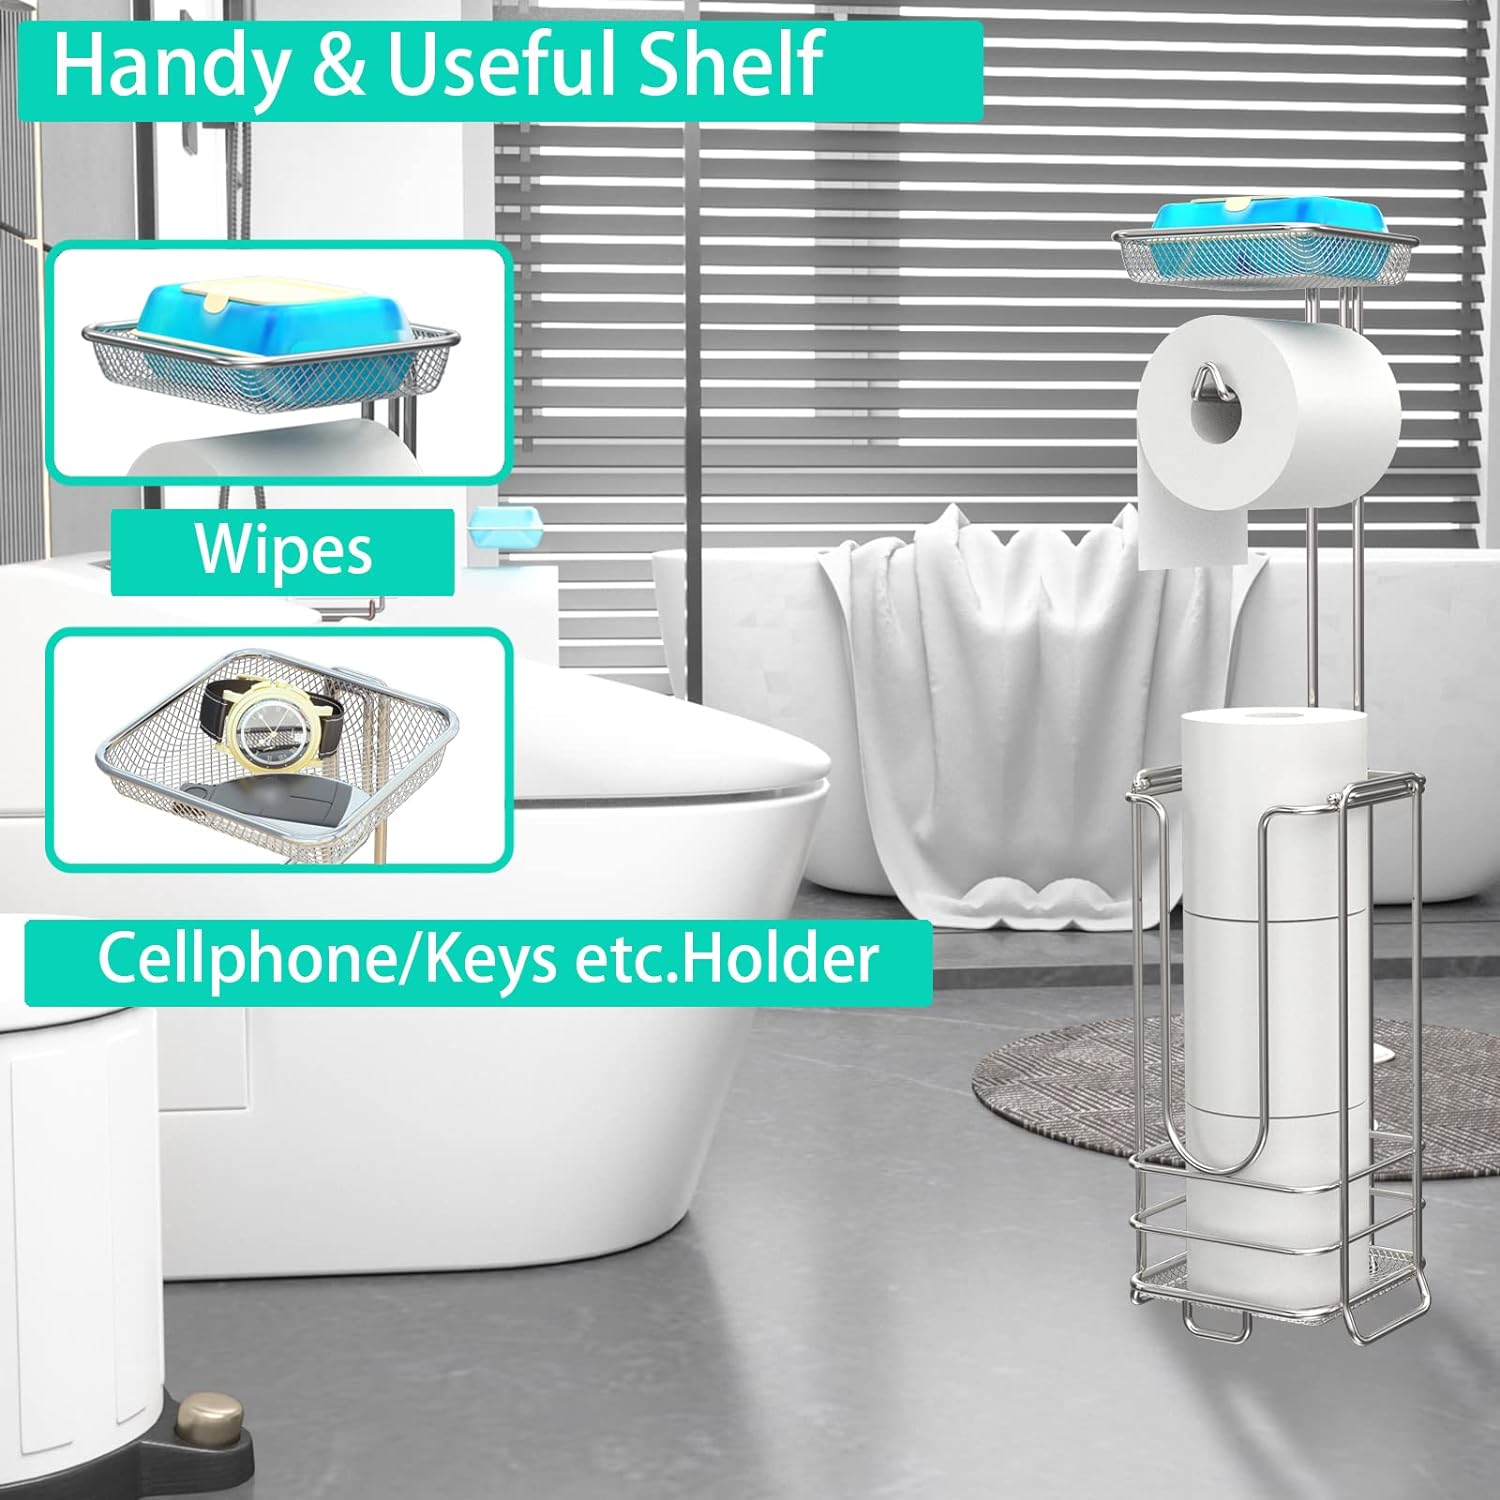 zccz - Toilet Paper Holder Stand - Tissue Holder for Bathroom with Shelf